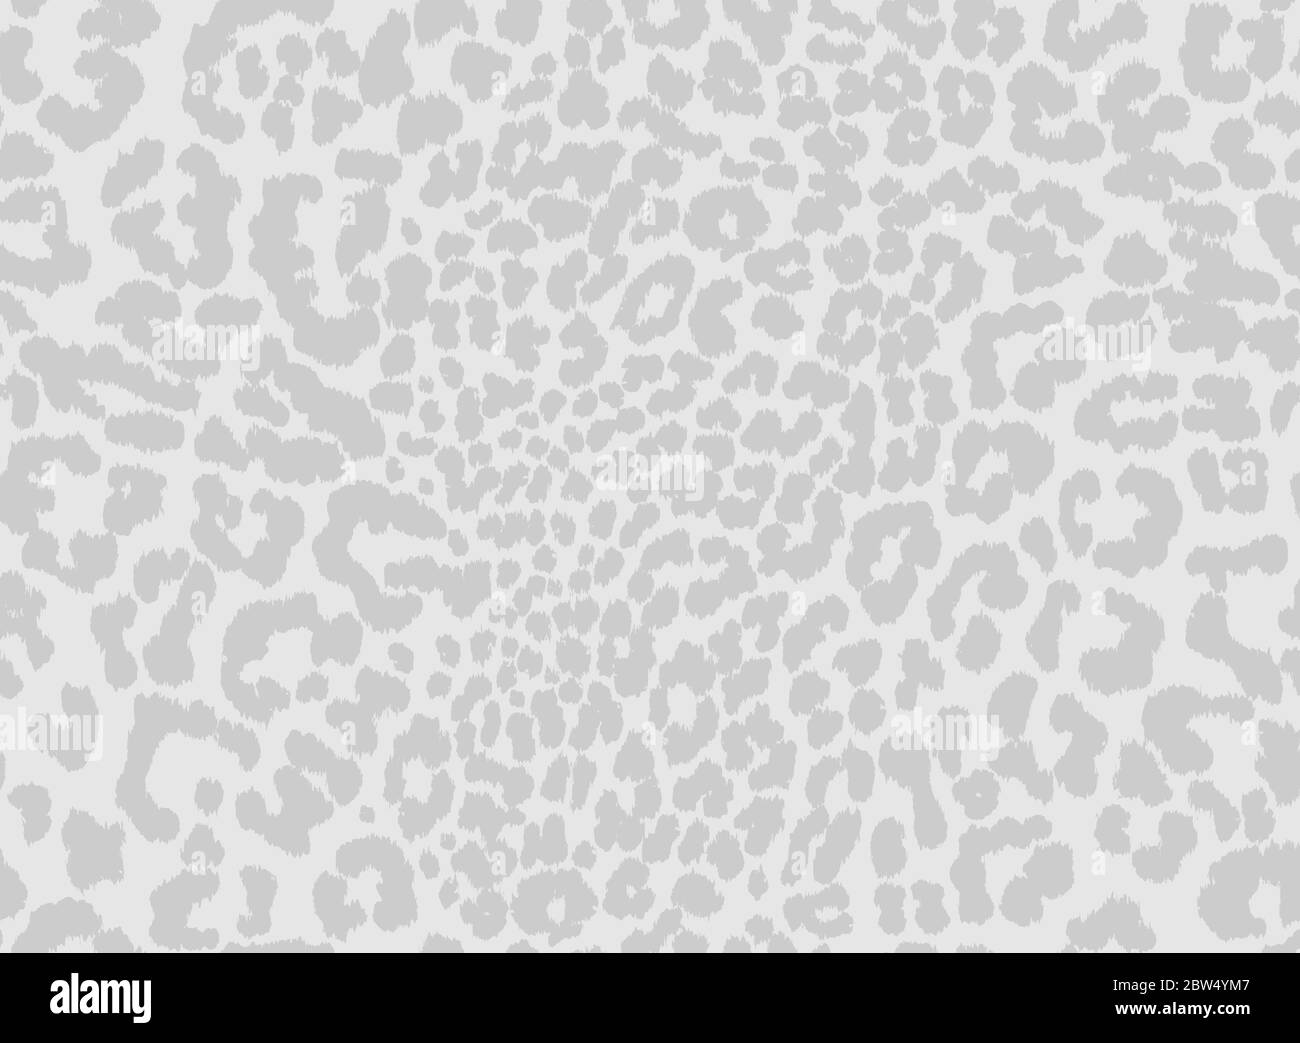 Leopard print seamless pattern design with subtle light grey textured spots on off white background. Animal repeat surface pattern design. Stock Vector